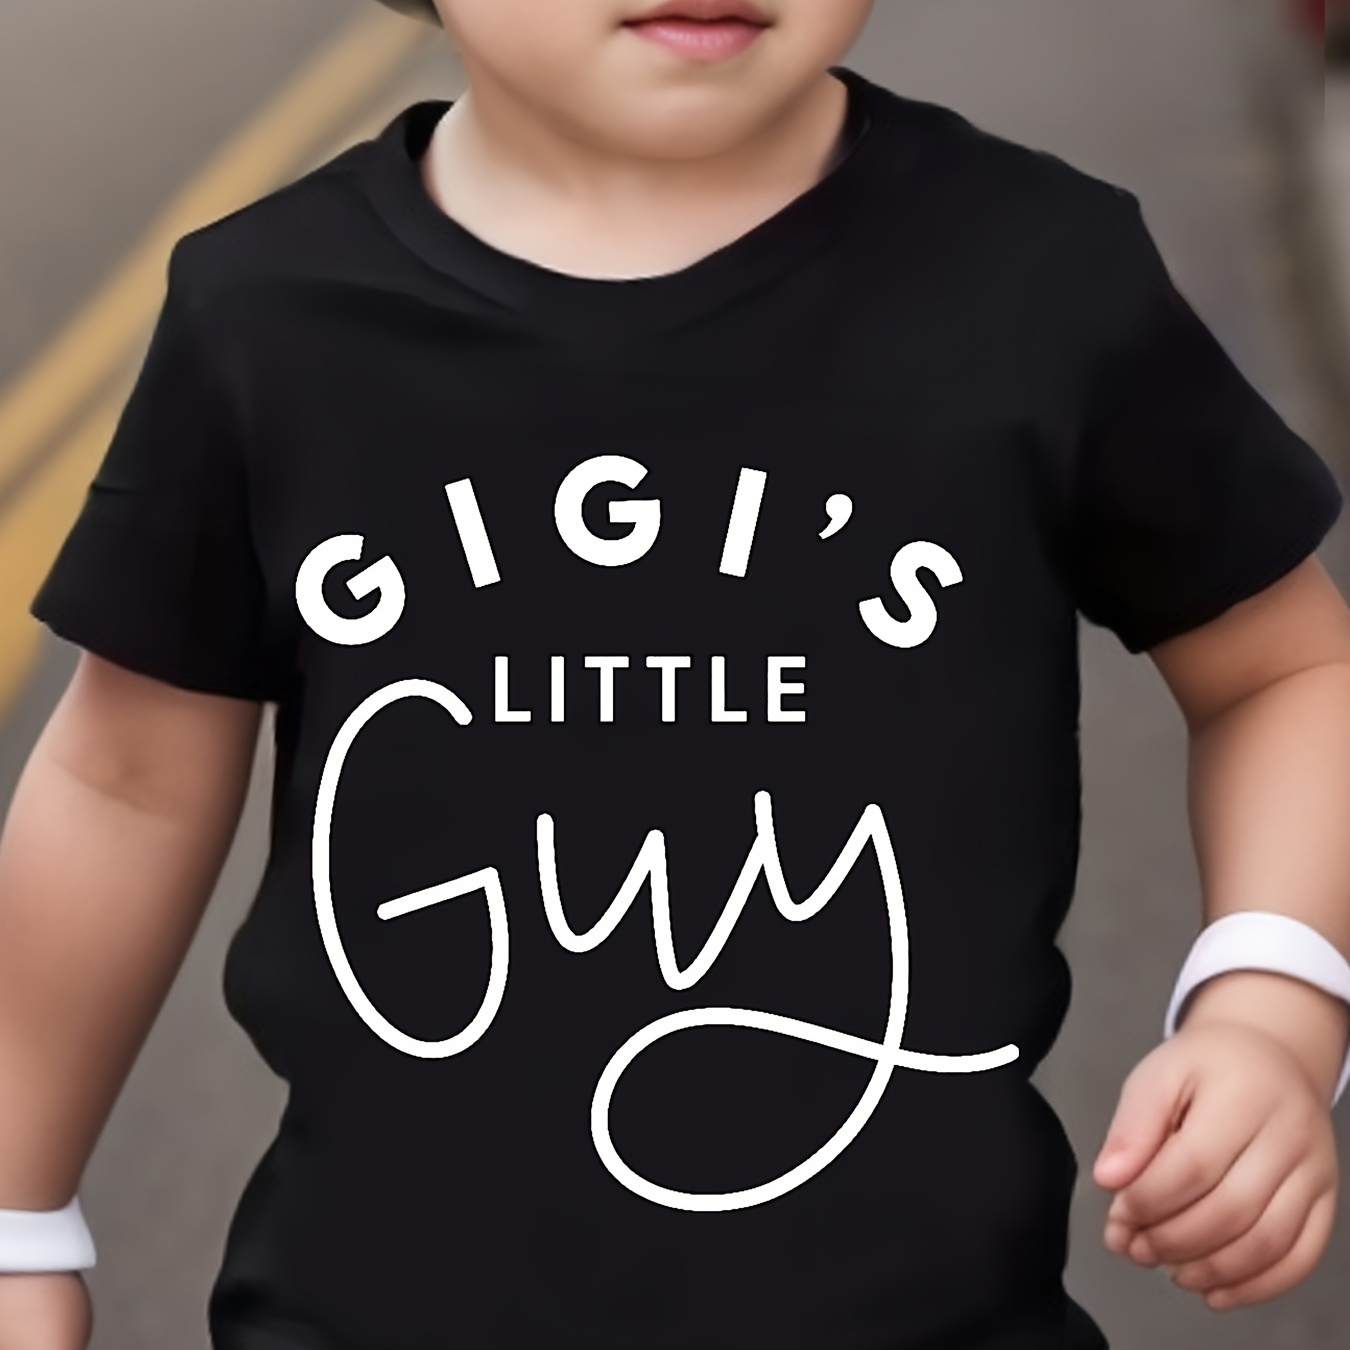 

Gig's Little Guy Letter Print Boys Creative T-shirt, Casual Lightweight Comfy Short Sleeve Tee Tops, Kids Clothes For Summer